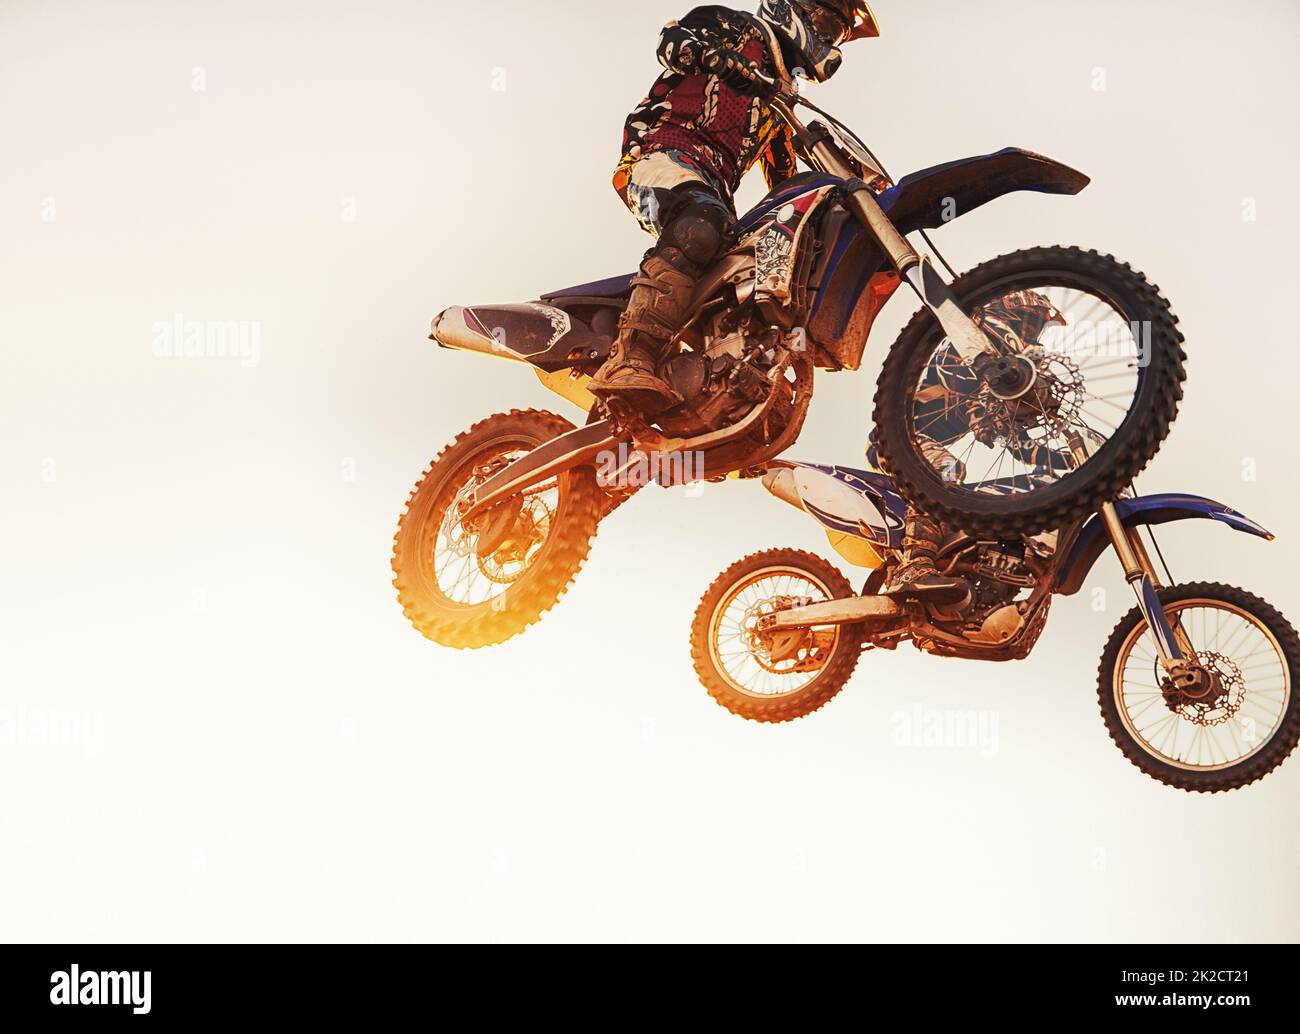 Theyre neck-a-neck. A shot of two motocross riders in midair during a race. Stock Photo